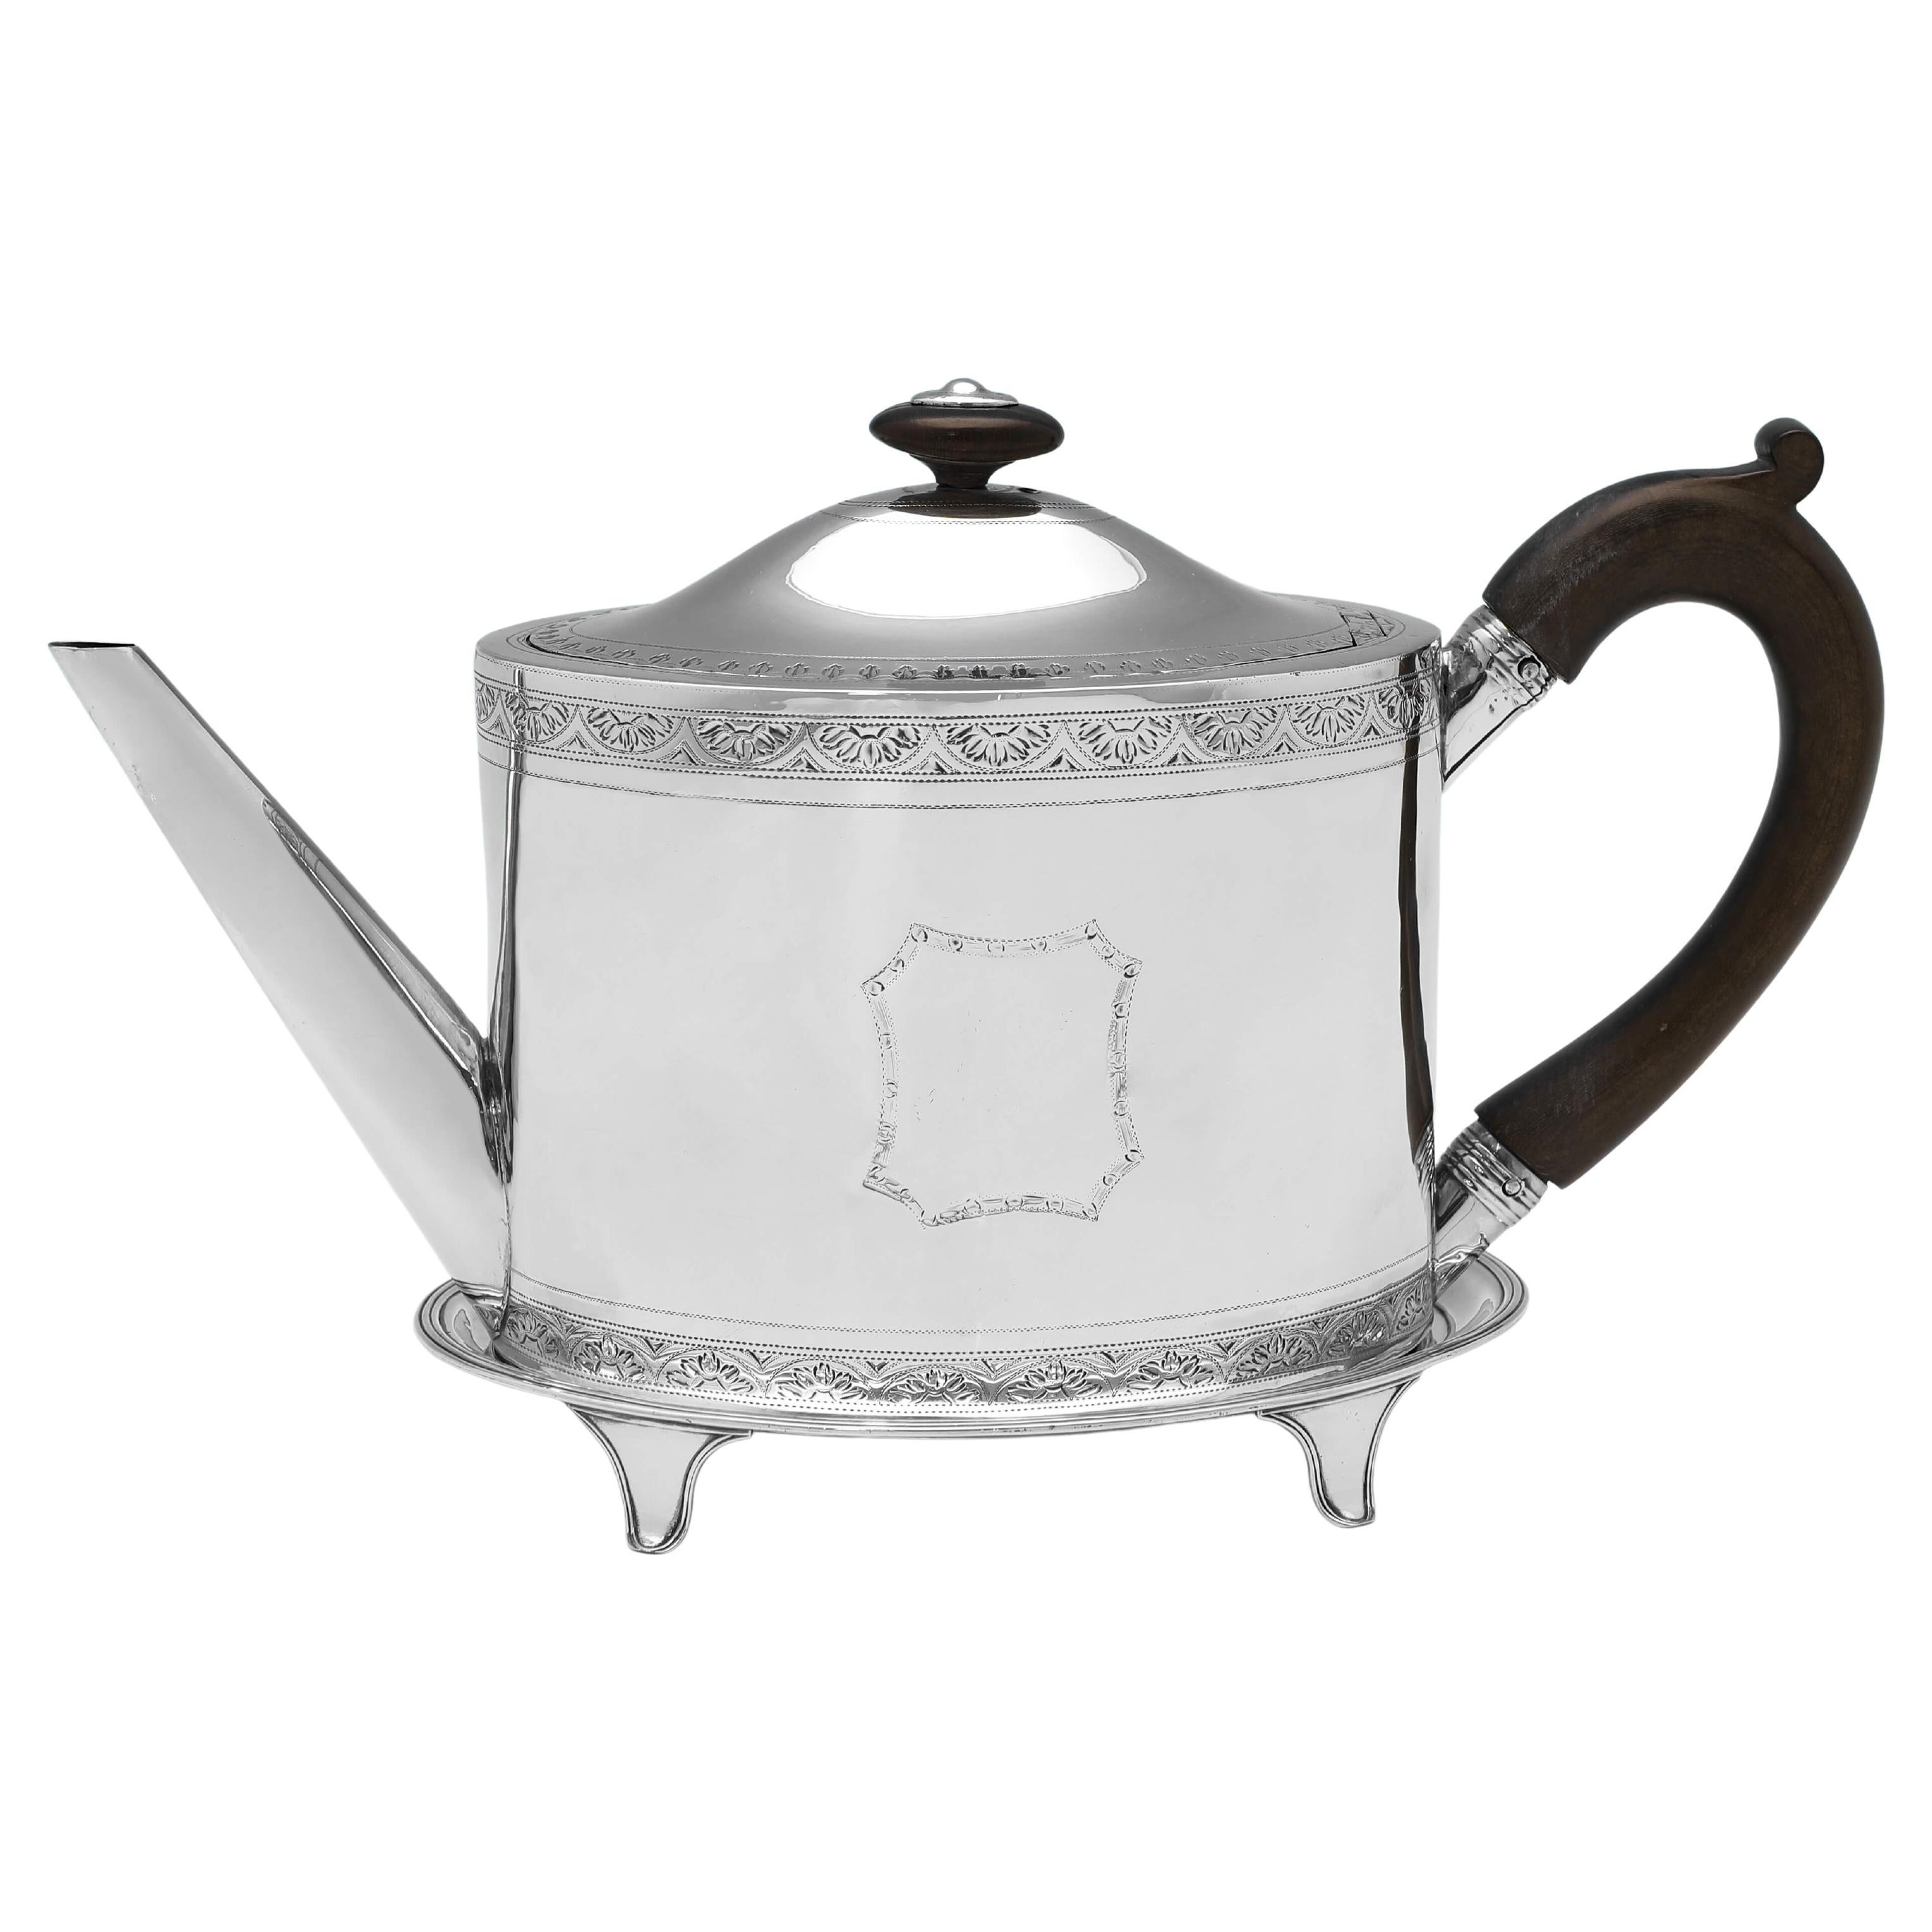 Neoclassical Sterling Silver Teapot & Stand - Hallmarked in 1793 - Henry Chawner For Sale